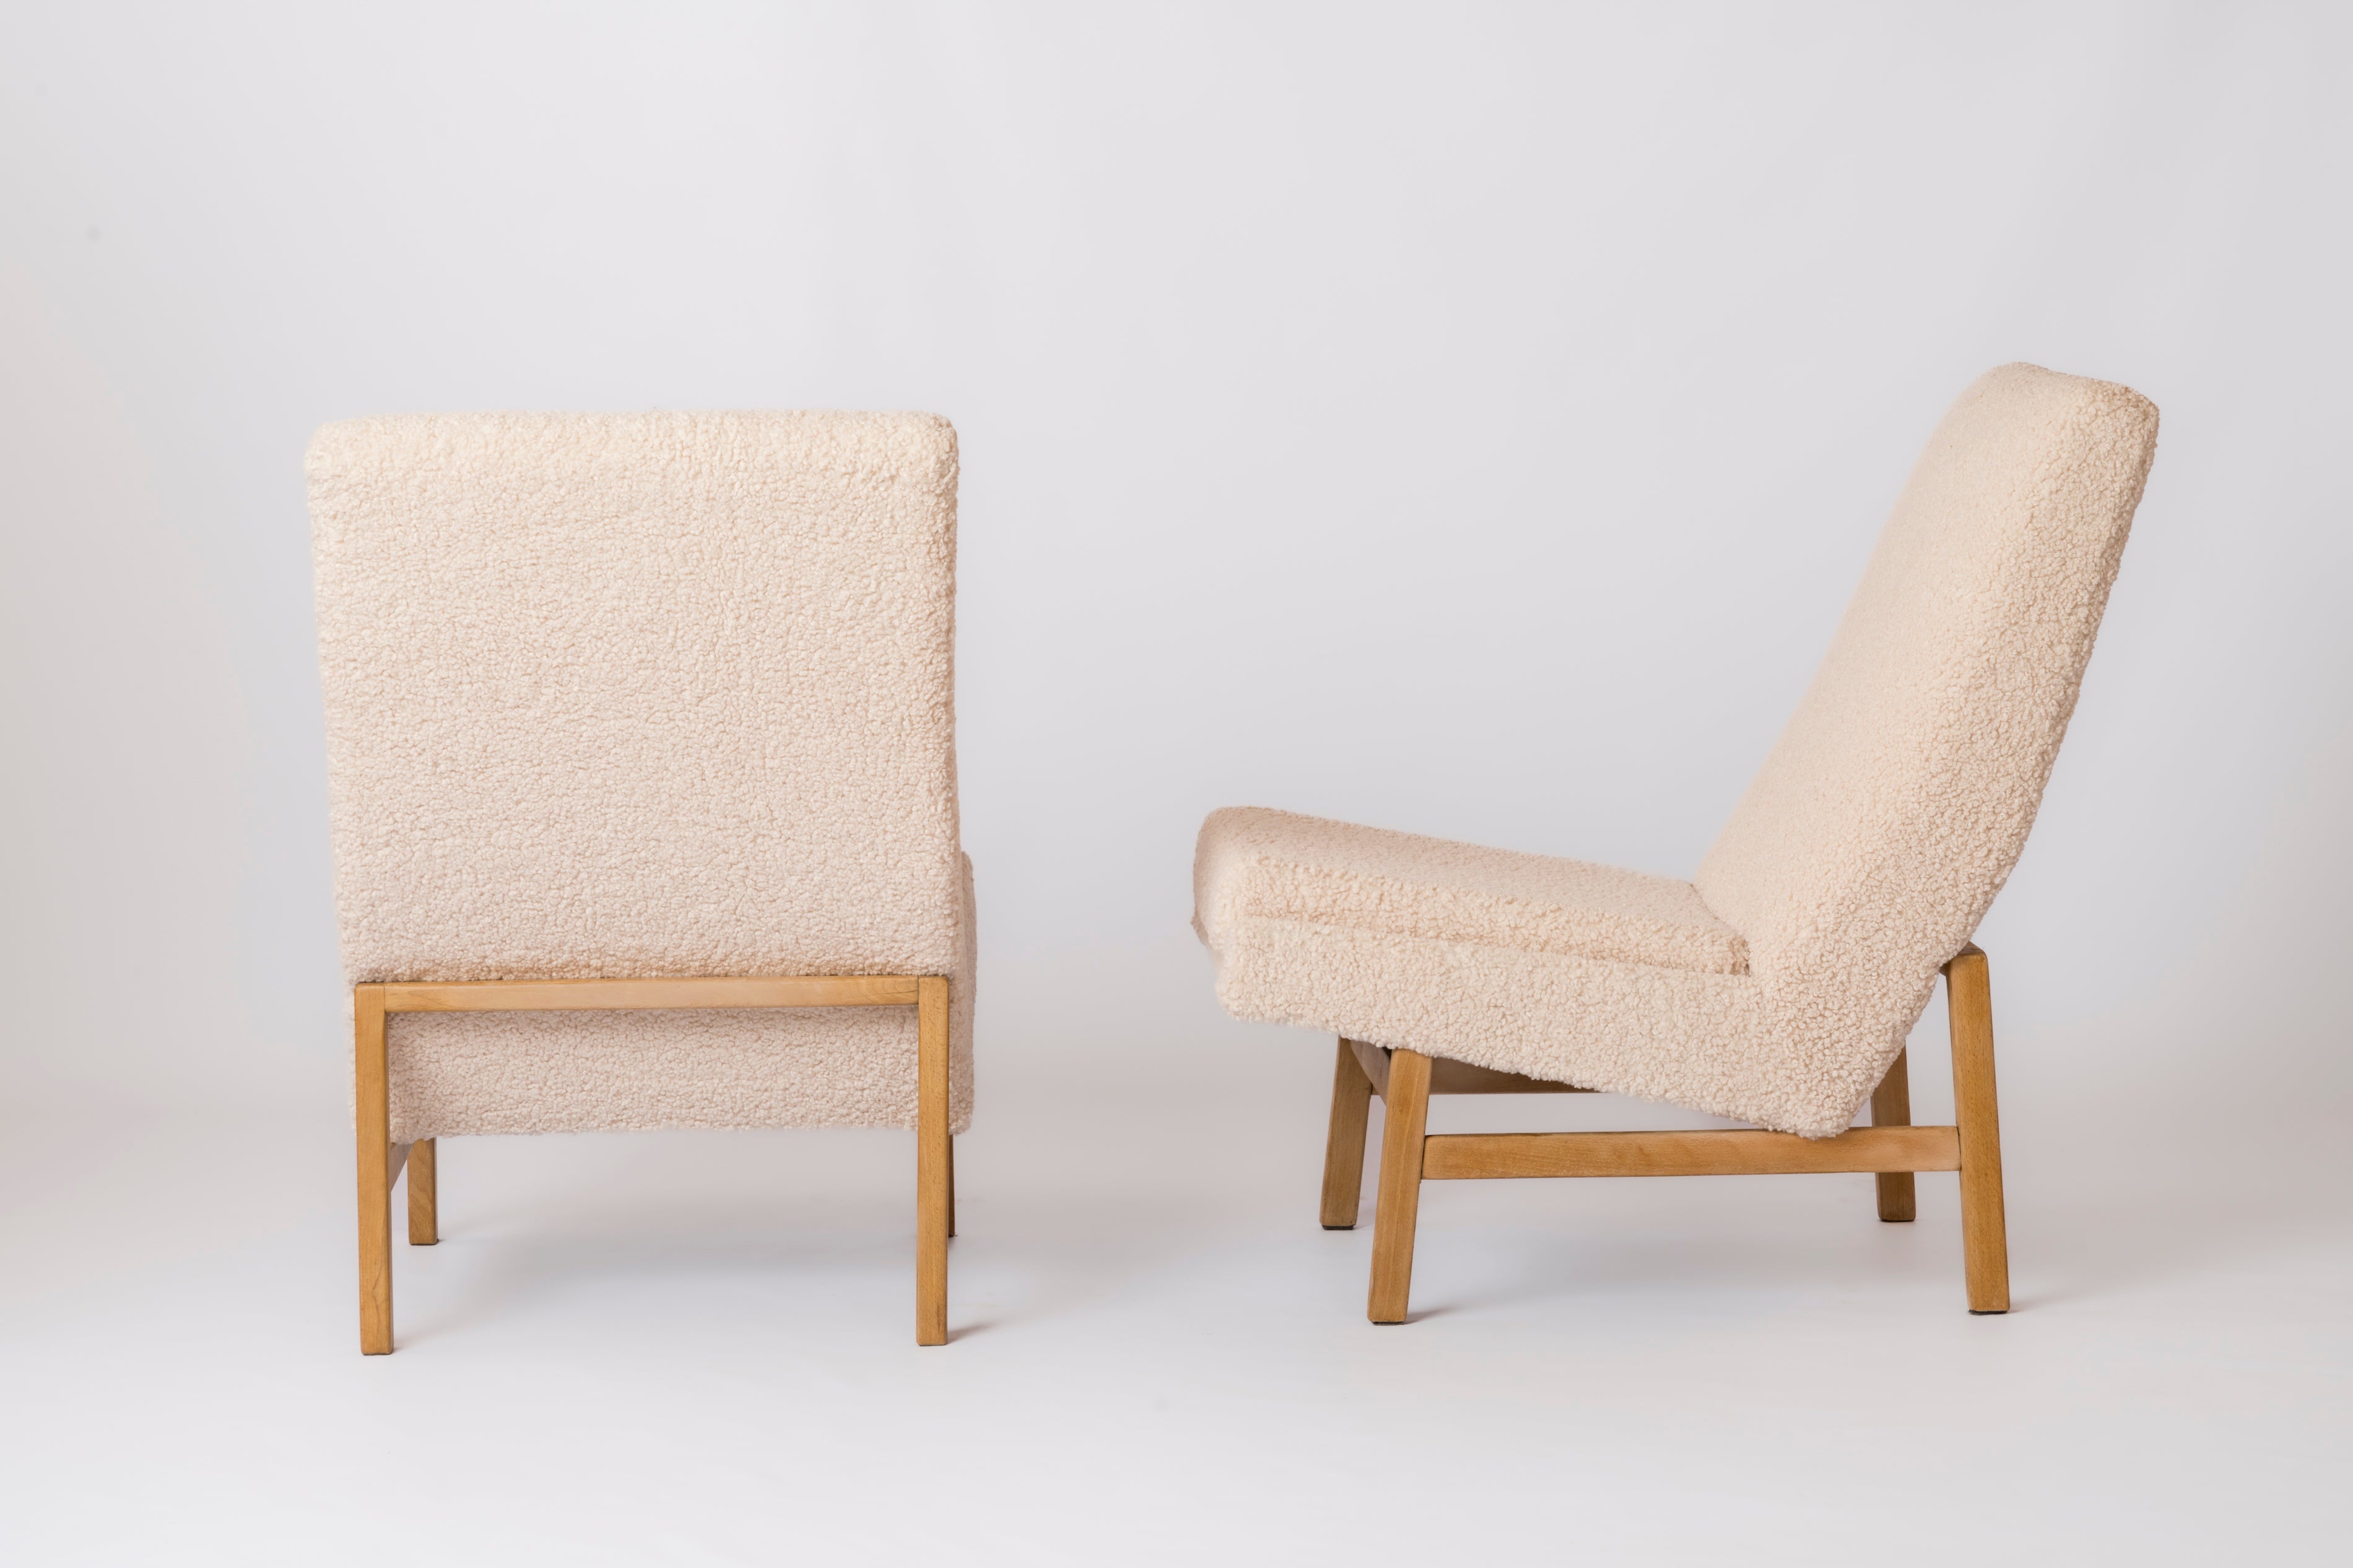 Ash & Cream Boucle Chairs by Guariche, Mortier, Motte for ARP, France, 1955